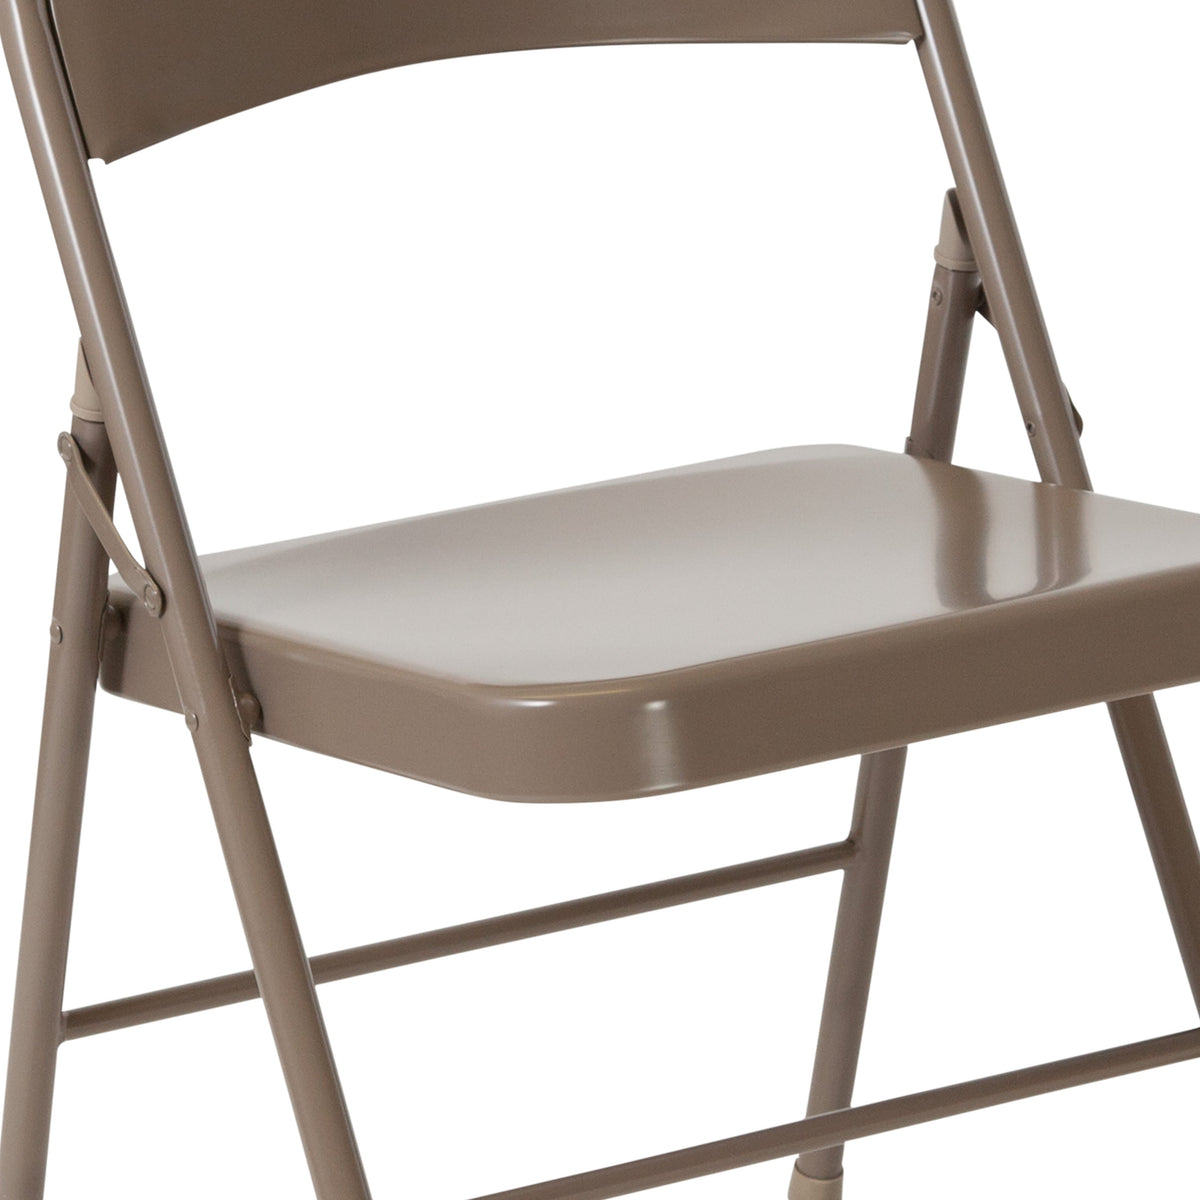 Beige |#| Double Braced Beige Metal Folding Chair - Event Chair - Portable Chair